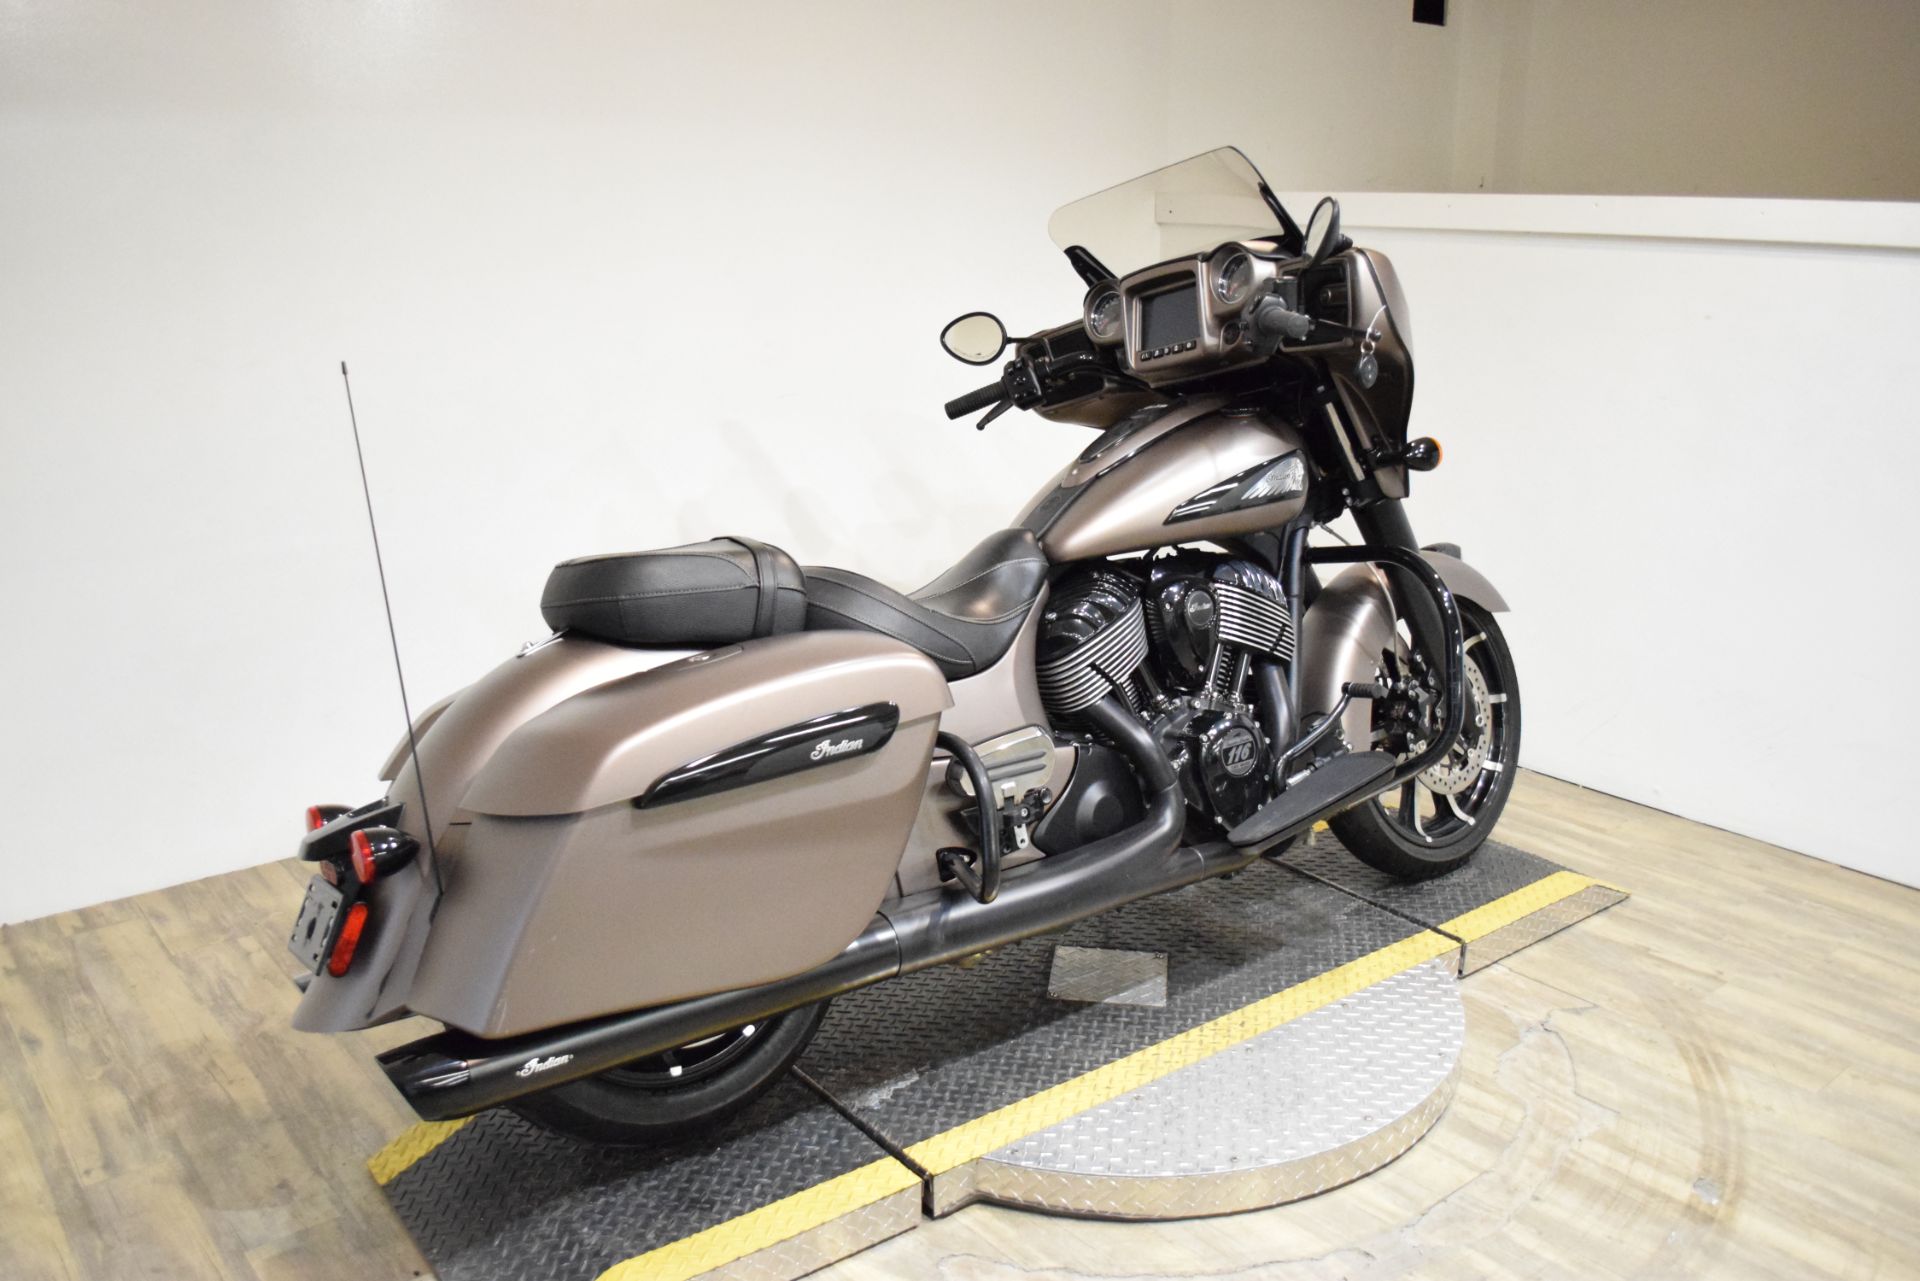 2019 Indian Motorcycle Chieftain® Dark Horse® ABS in Wauconda, Illinois - Photo 9